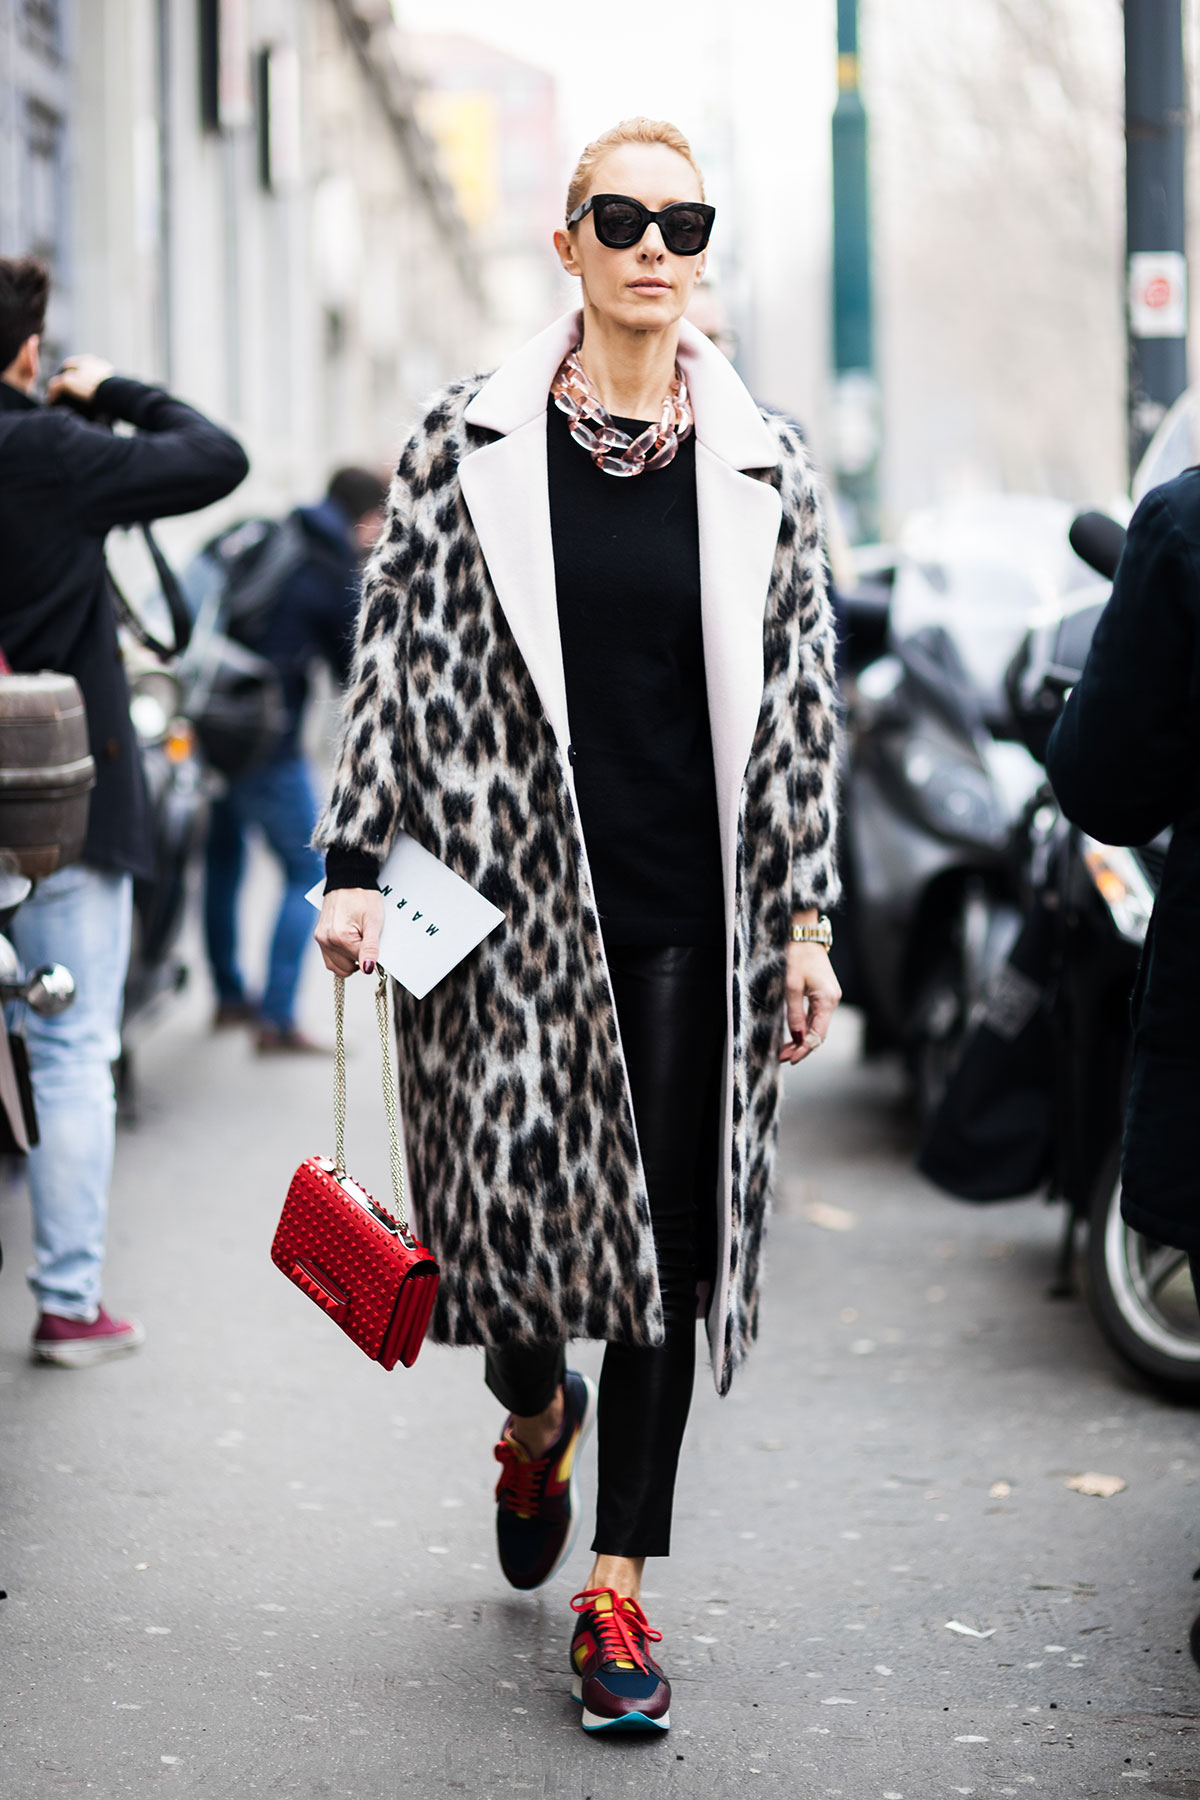 Elina Halimi wearing a MSGM leopard print coat, black leather pants, Burberry Prorsum sneakers and a Valentino studded bag after the Marni Fall/Winter 2015-2016 fashion show in Milan, Italy